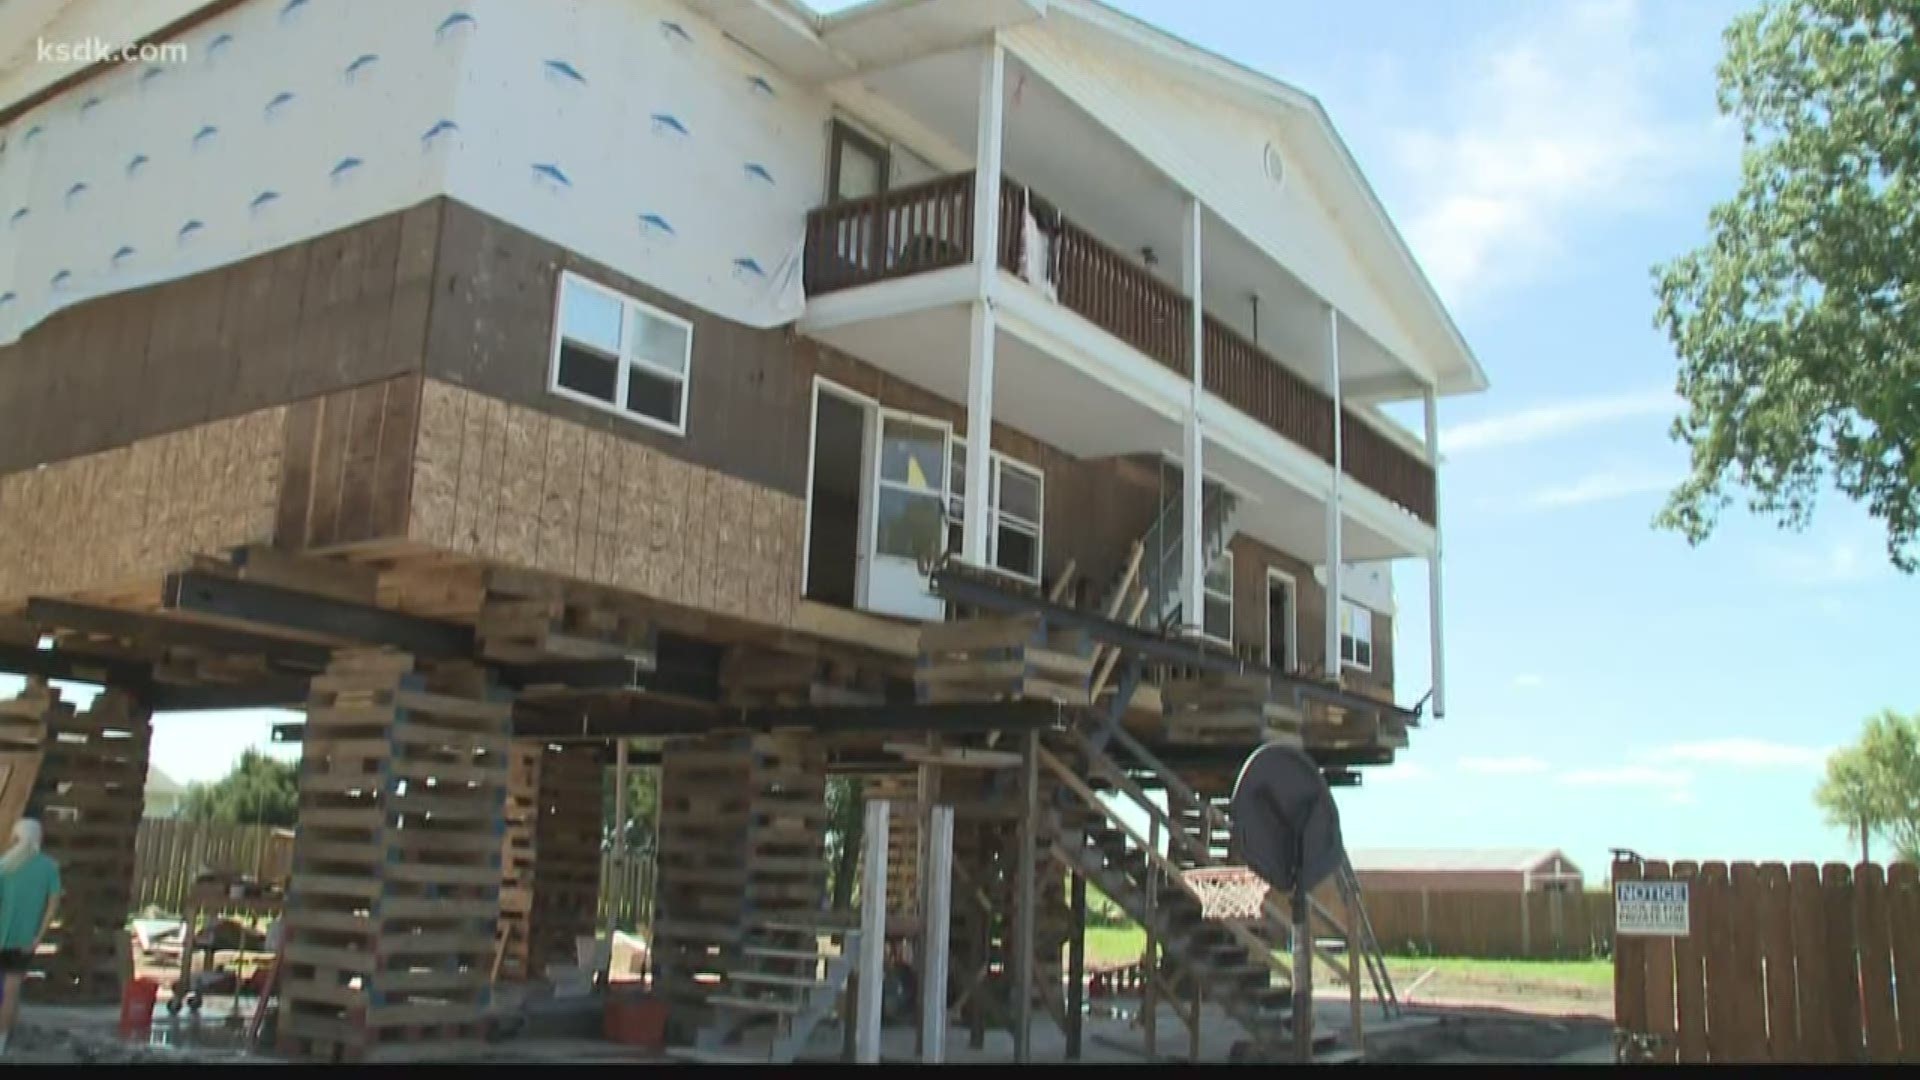 Some much needed financial help is on the way for flood victims in three Missouri counties.